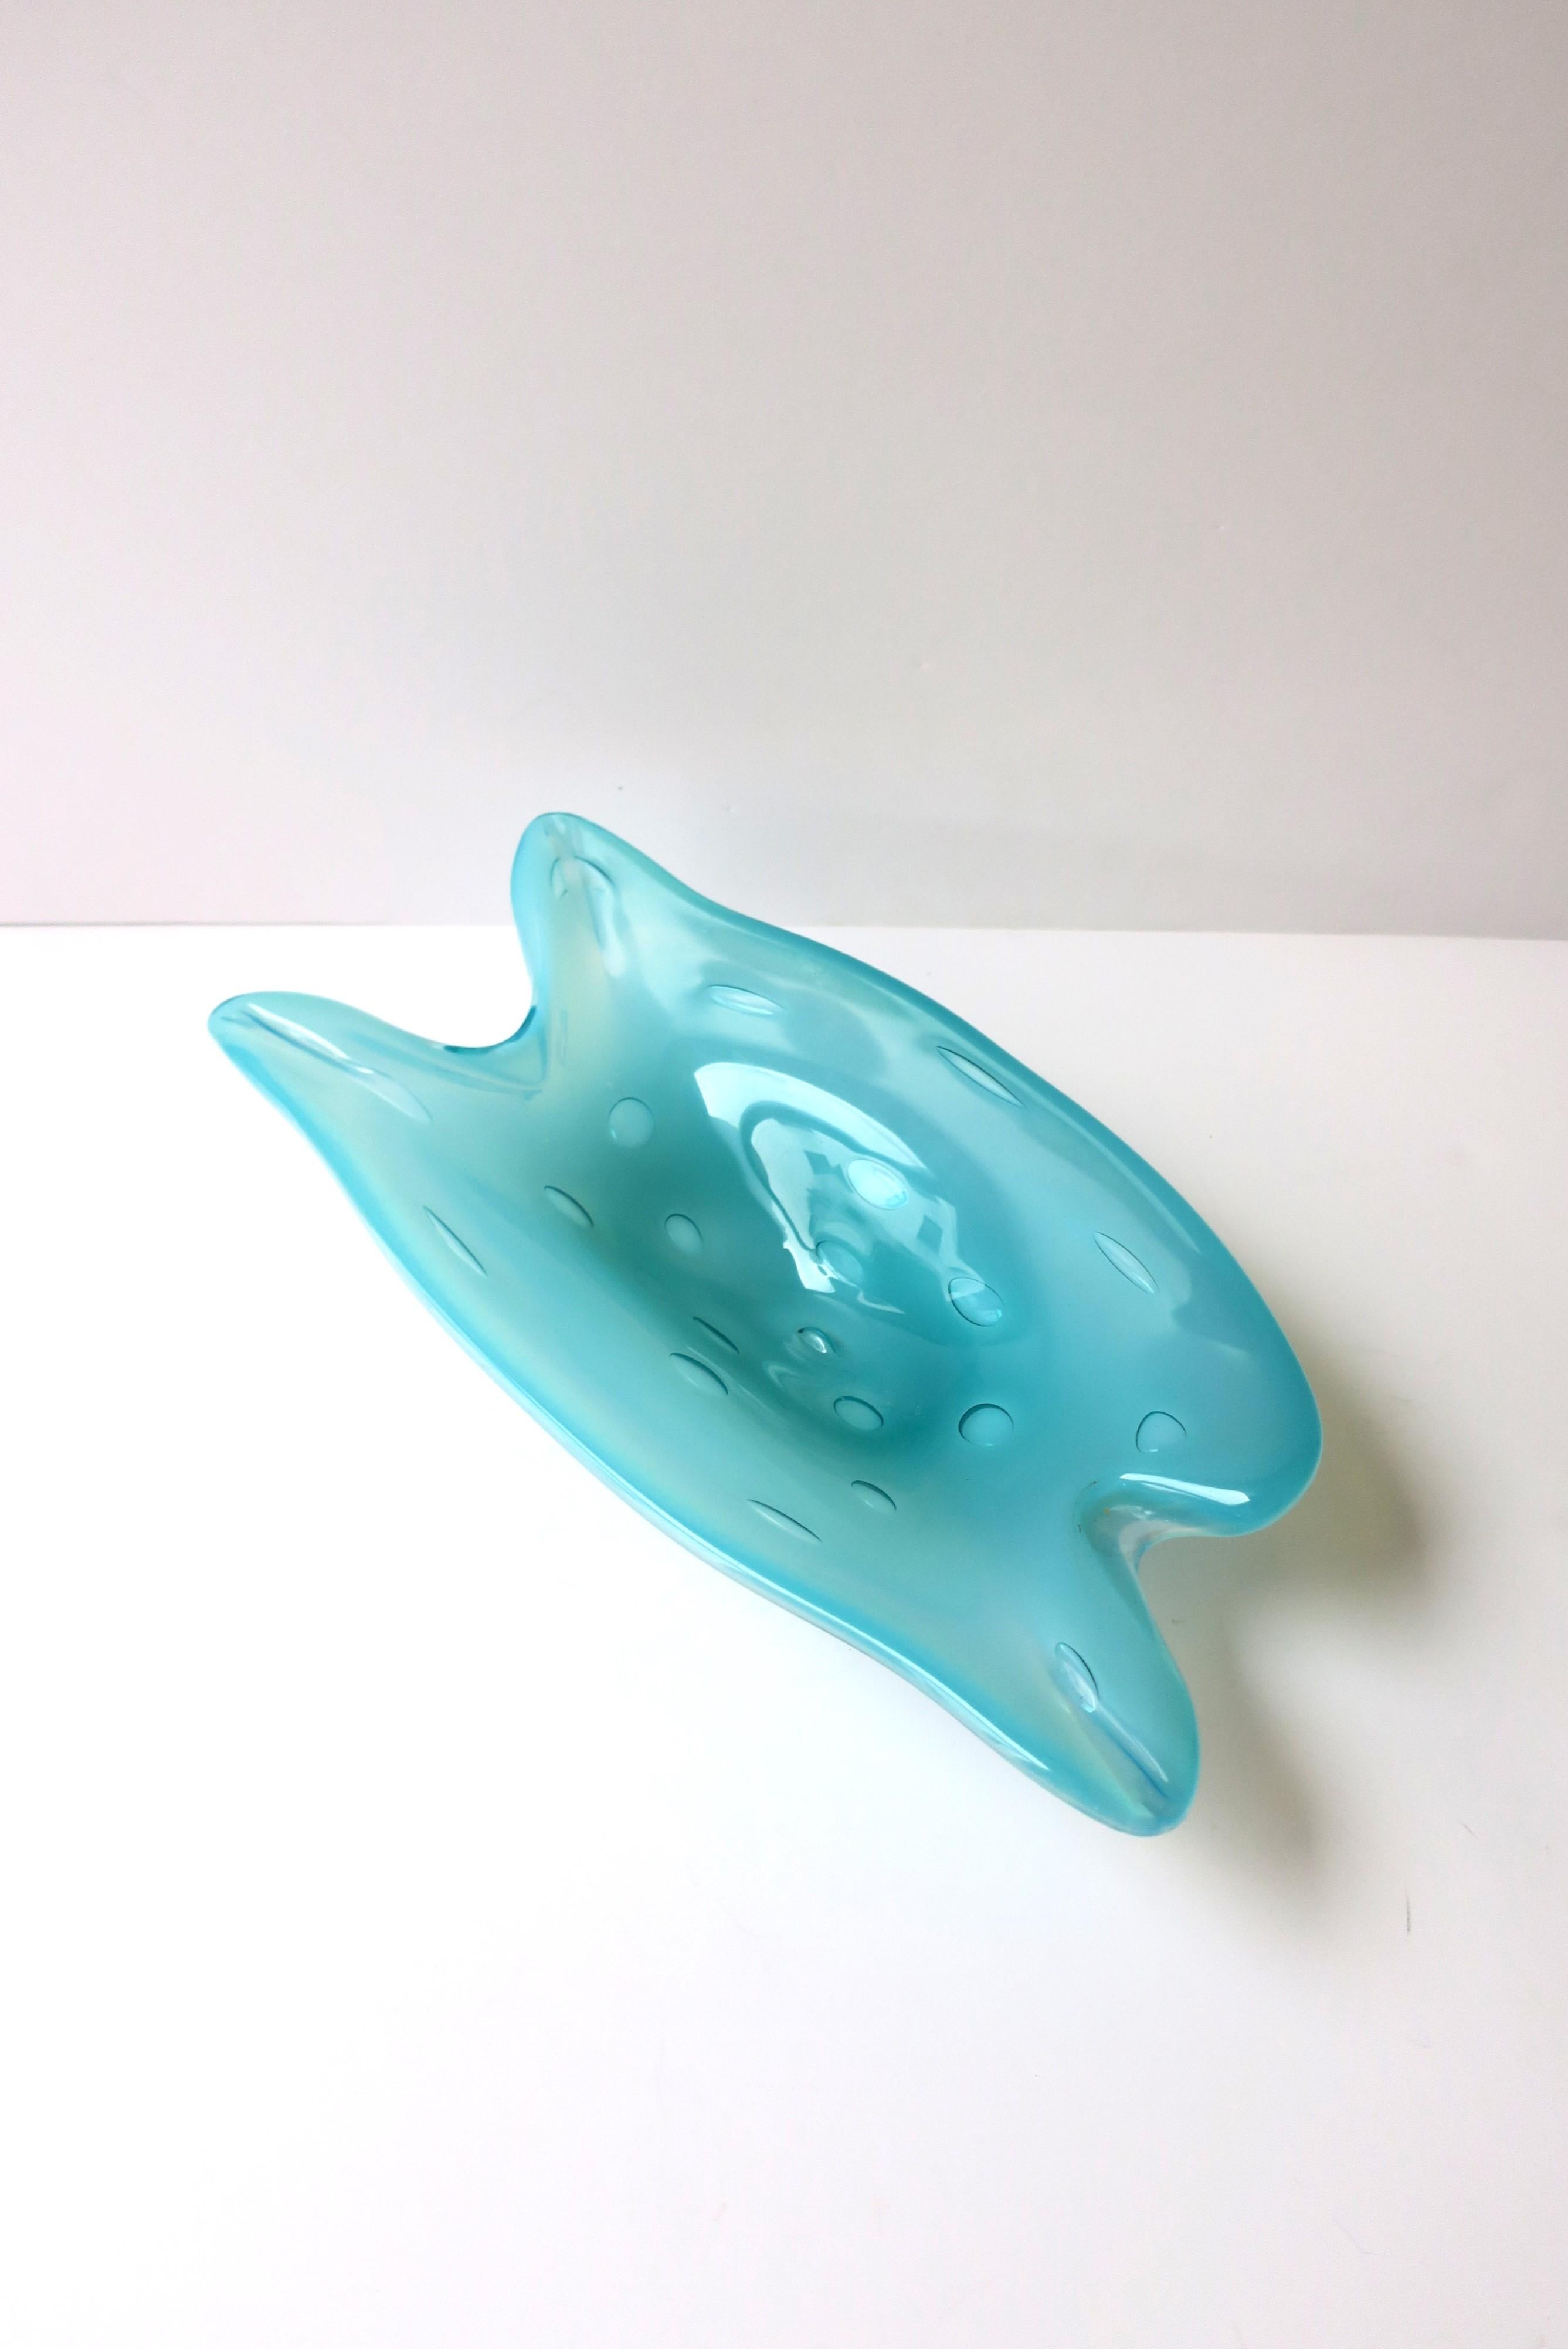 Hand-Crafted Italian Murano Blue Art Glass Bowl with Big Bubble Design Barovier et Toso For Sale